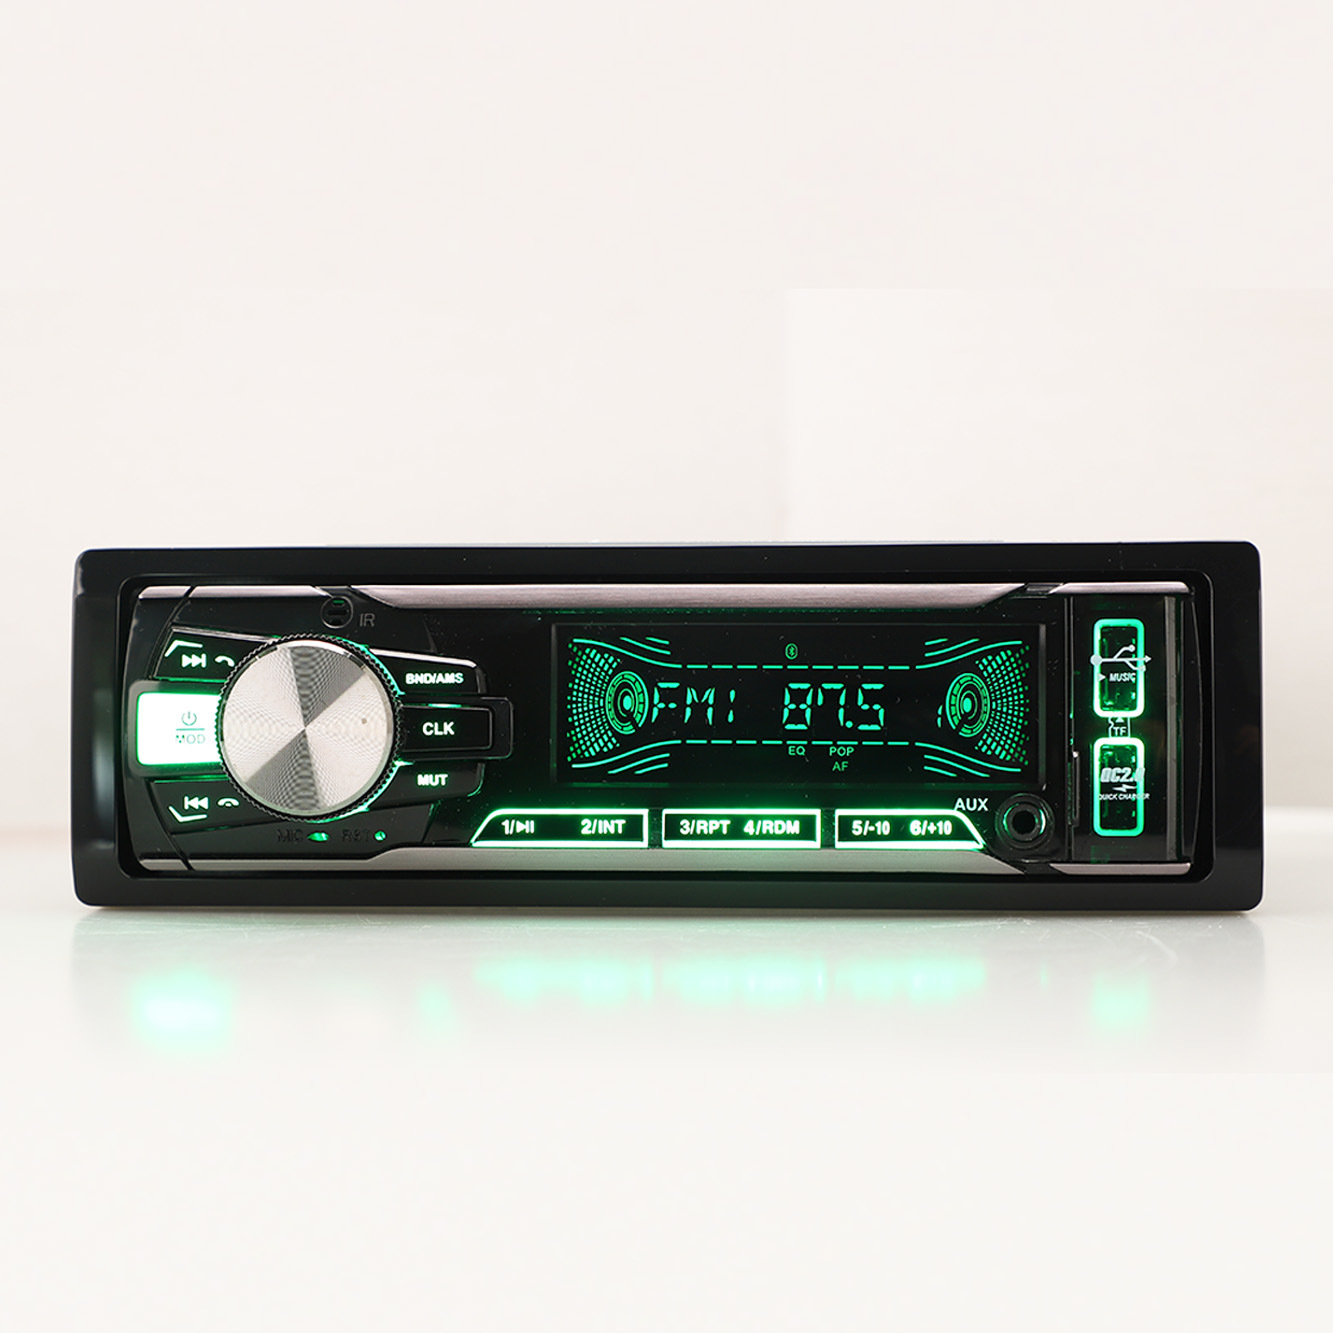 Fixed Panel Player Car Stereo Car Video Car Audio Multi Color One DIN FM Car MP3 Player with Dual USB